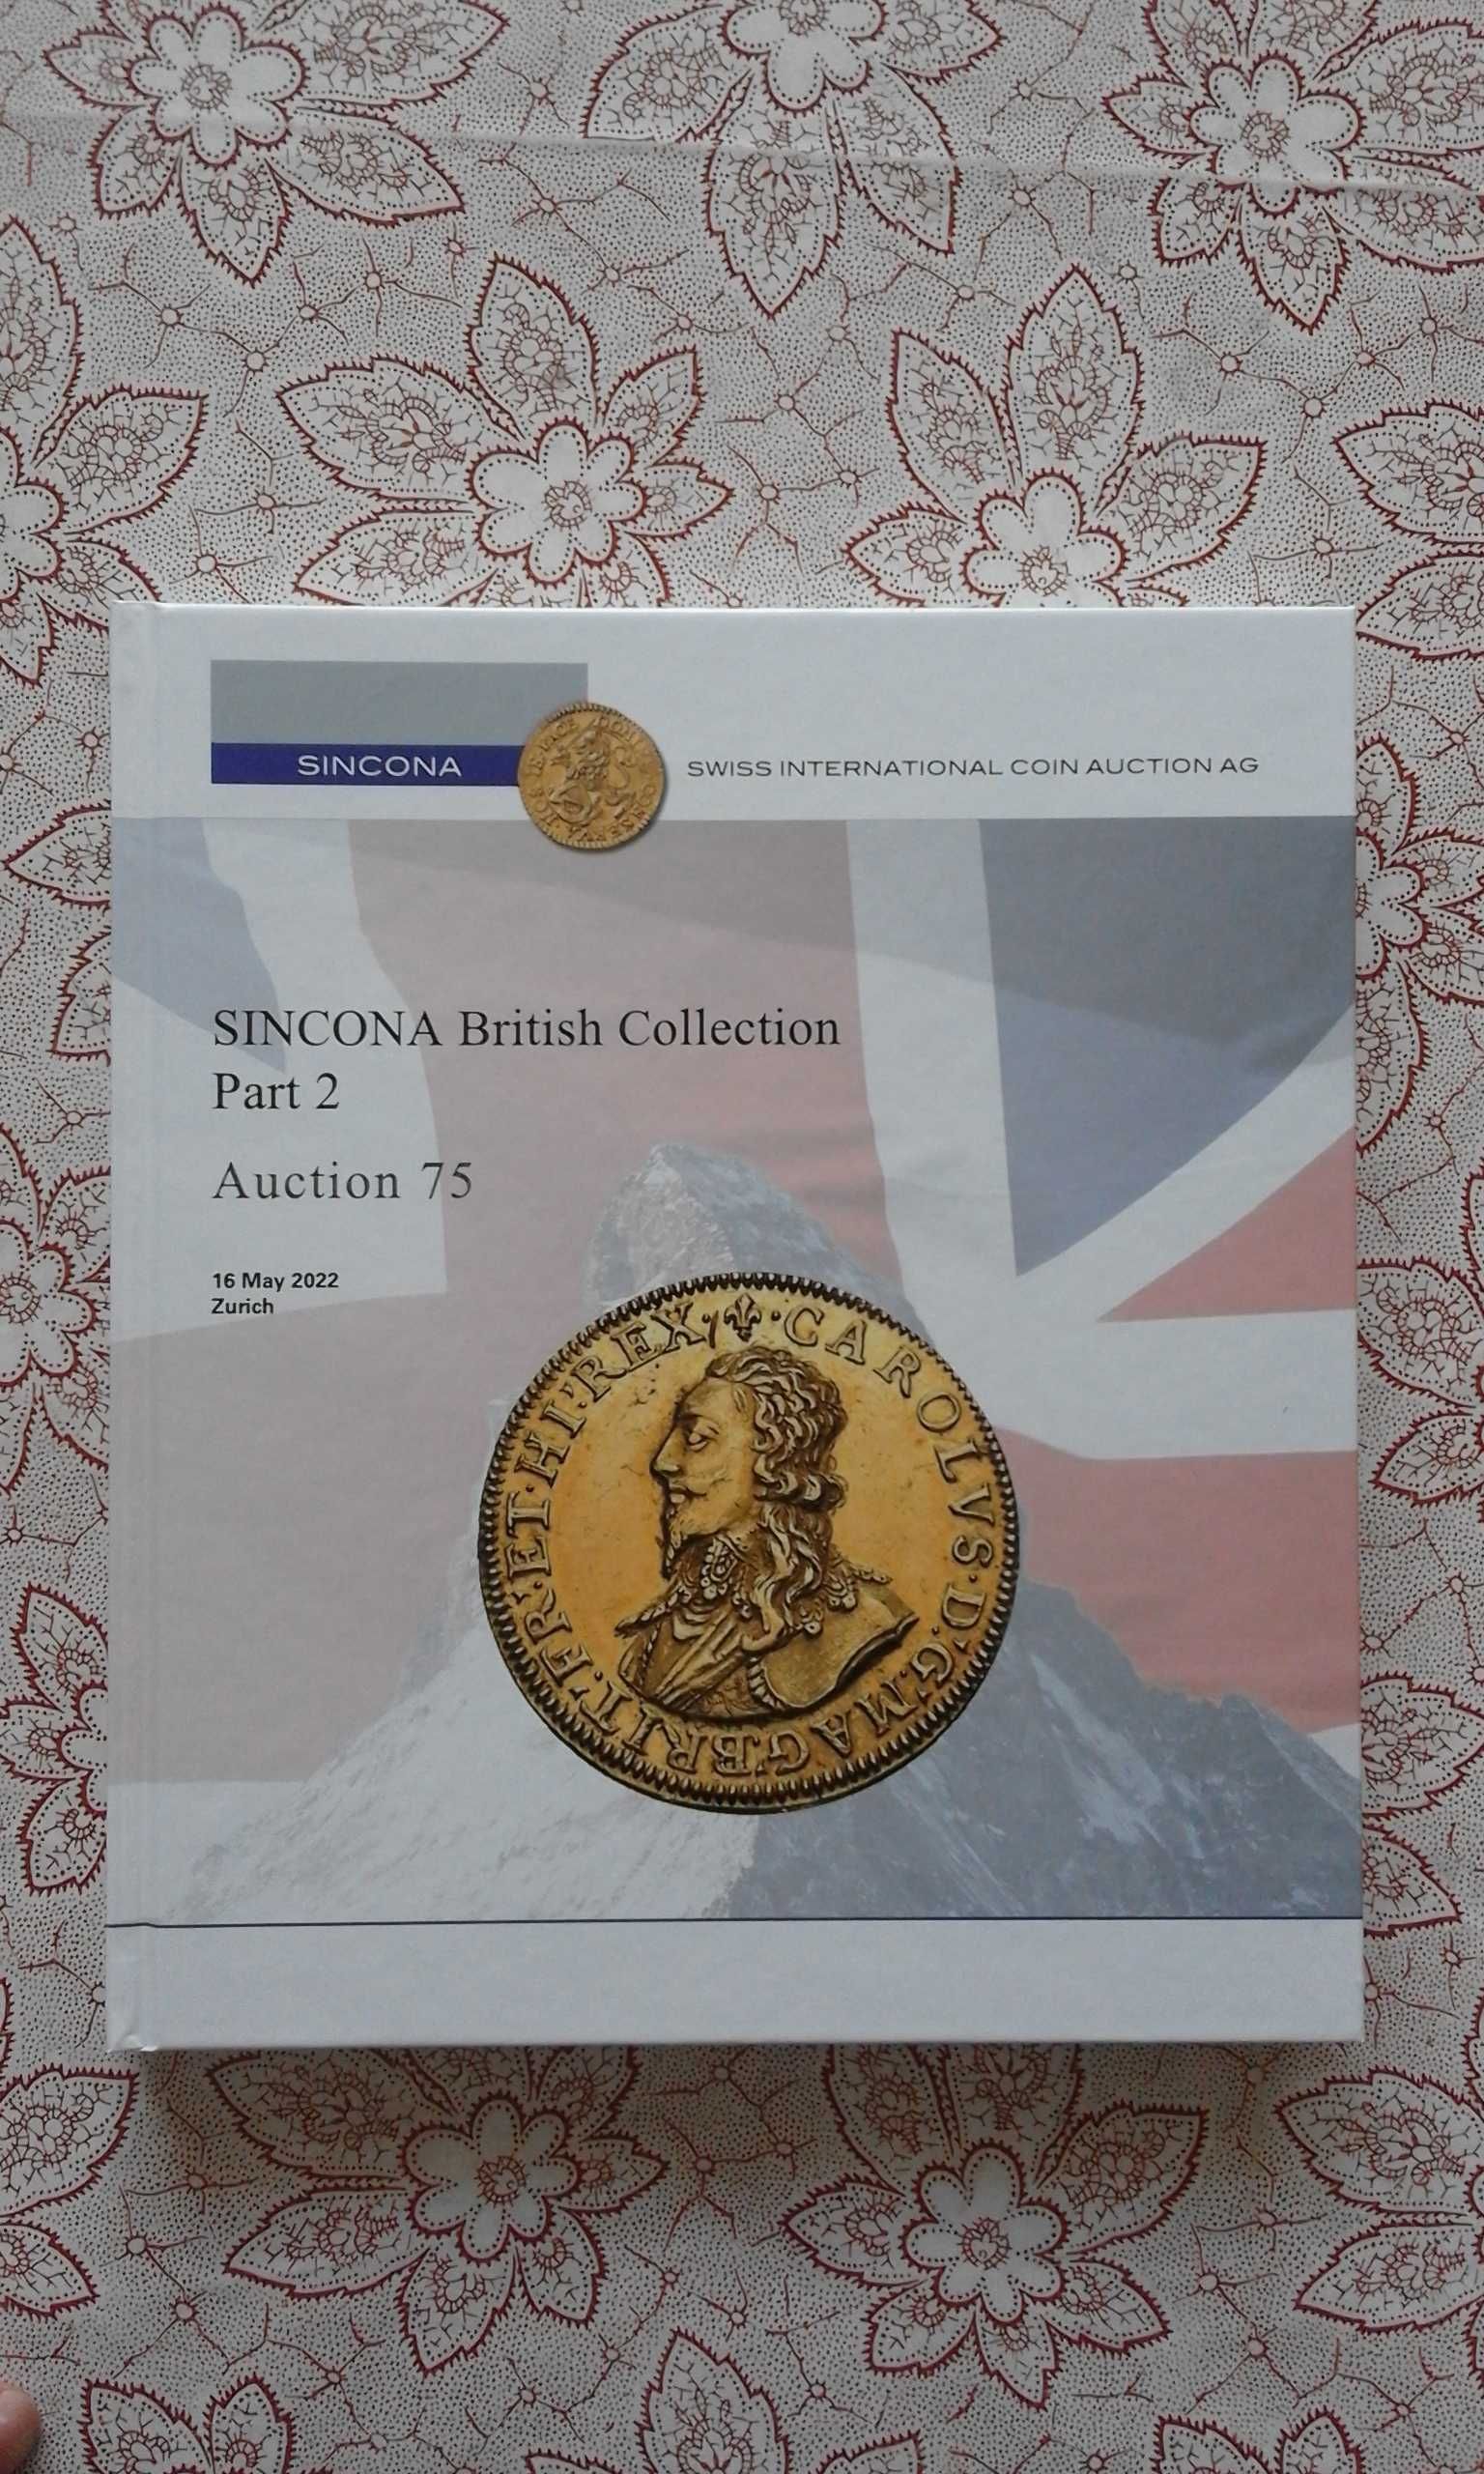 SINCONA Auction 75: British Collection Part 2 / 16 May 2022